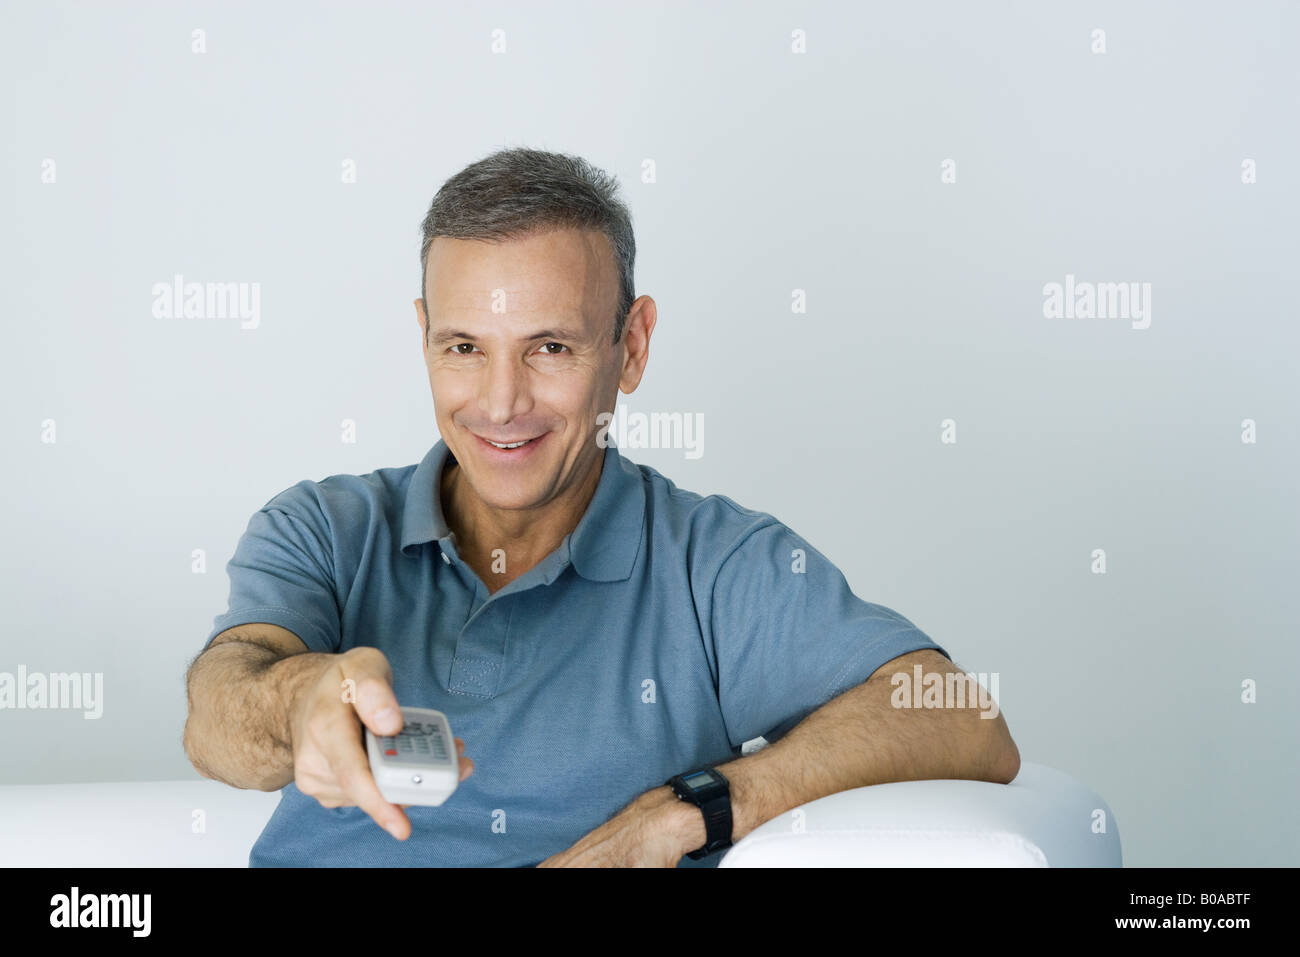 Man holding remote control, smiling at camera Stock Photo